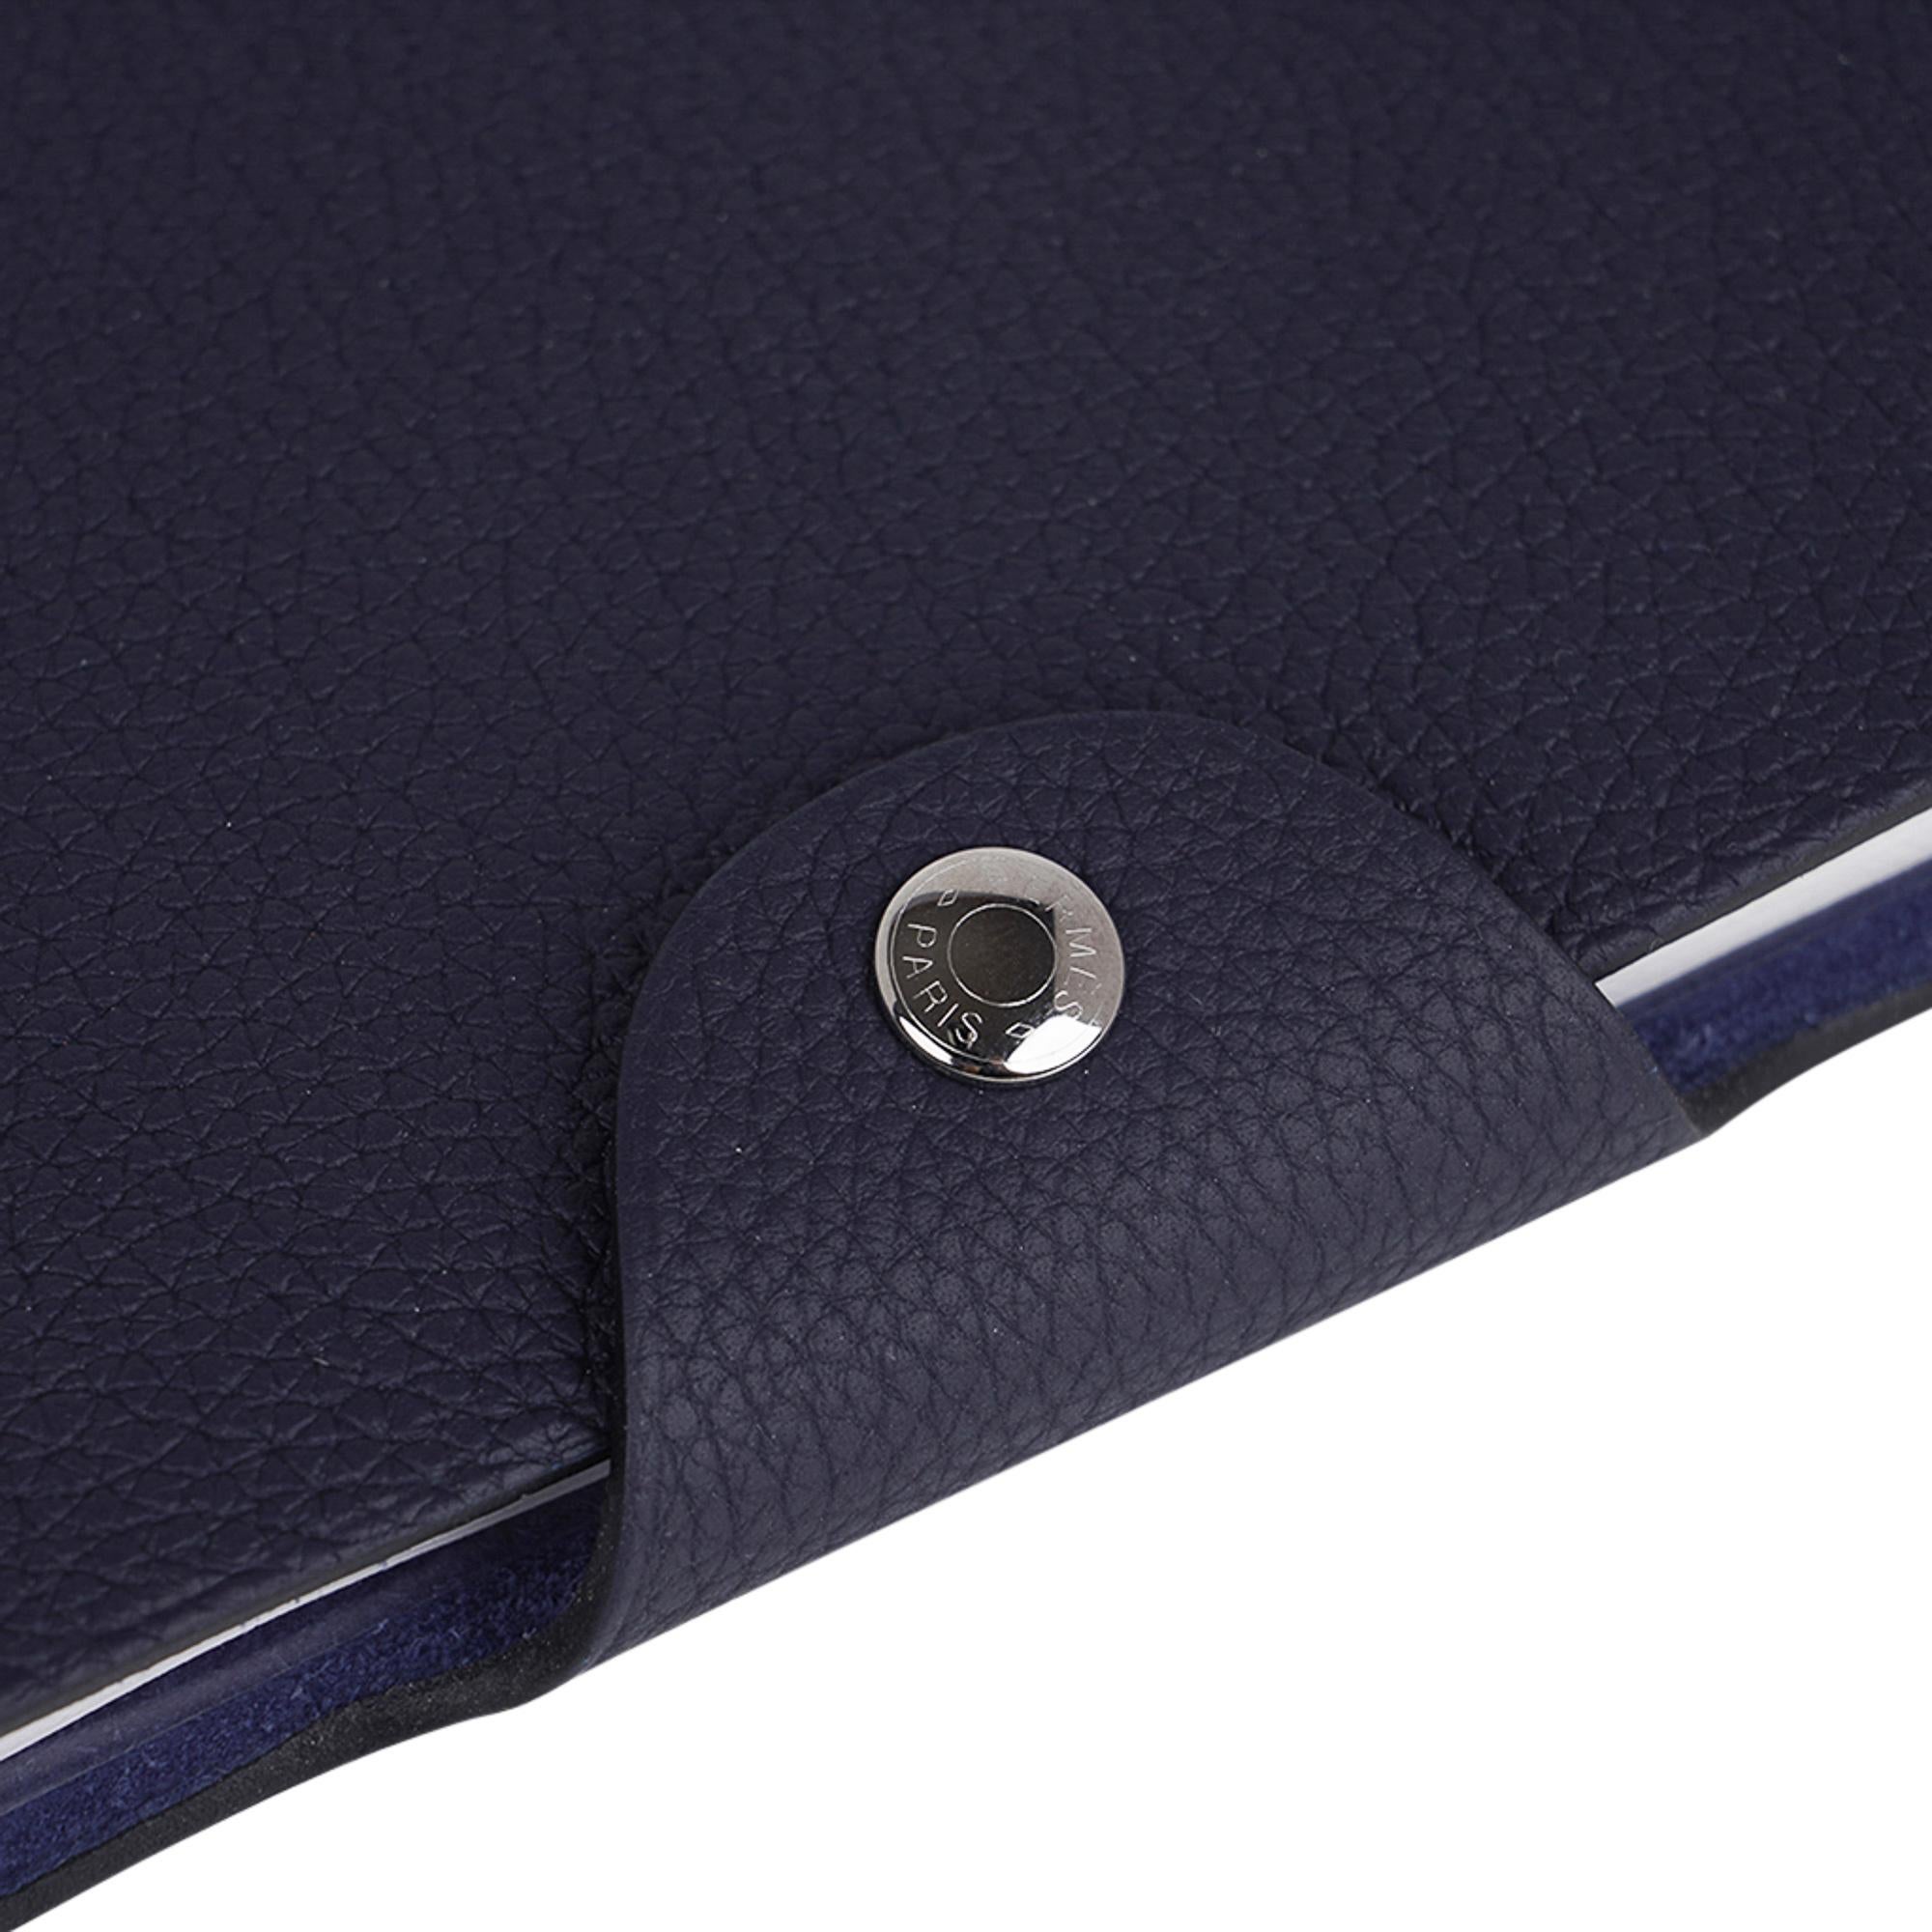 Mightychic offes an Hermes Ulysse MM model notebook cover featured in Bleu Nuit togo leather.
Palladium Clou de Selle snap.
Comes with a new Ulysse notebook refill.
Each item comes with the signature Hermes box and ribbon.
New or Store Fresh